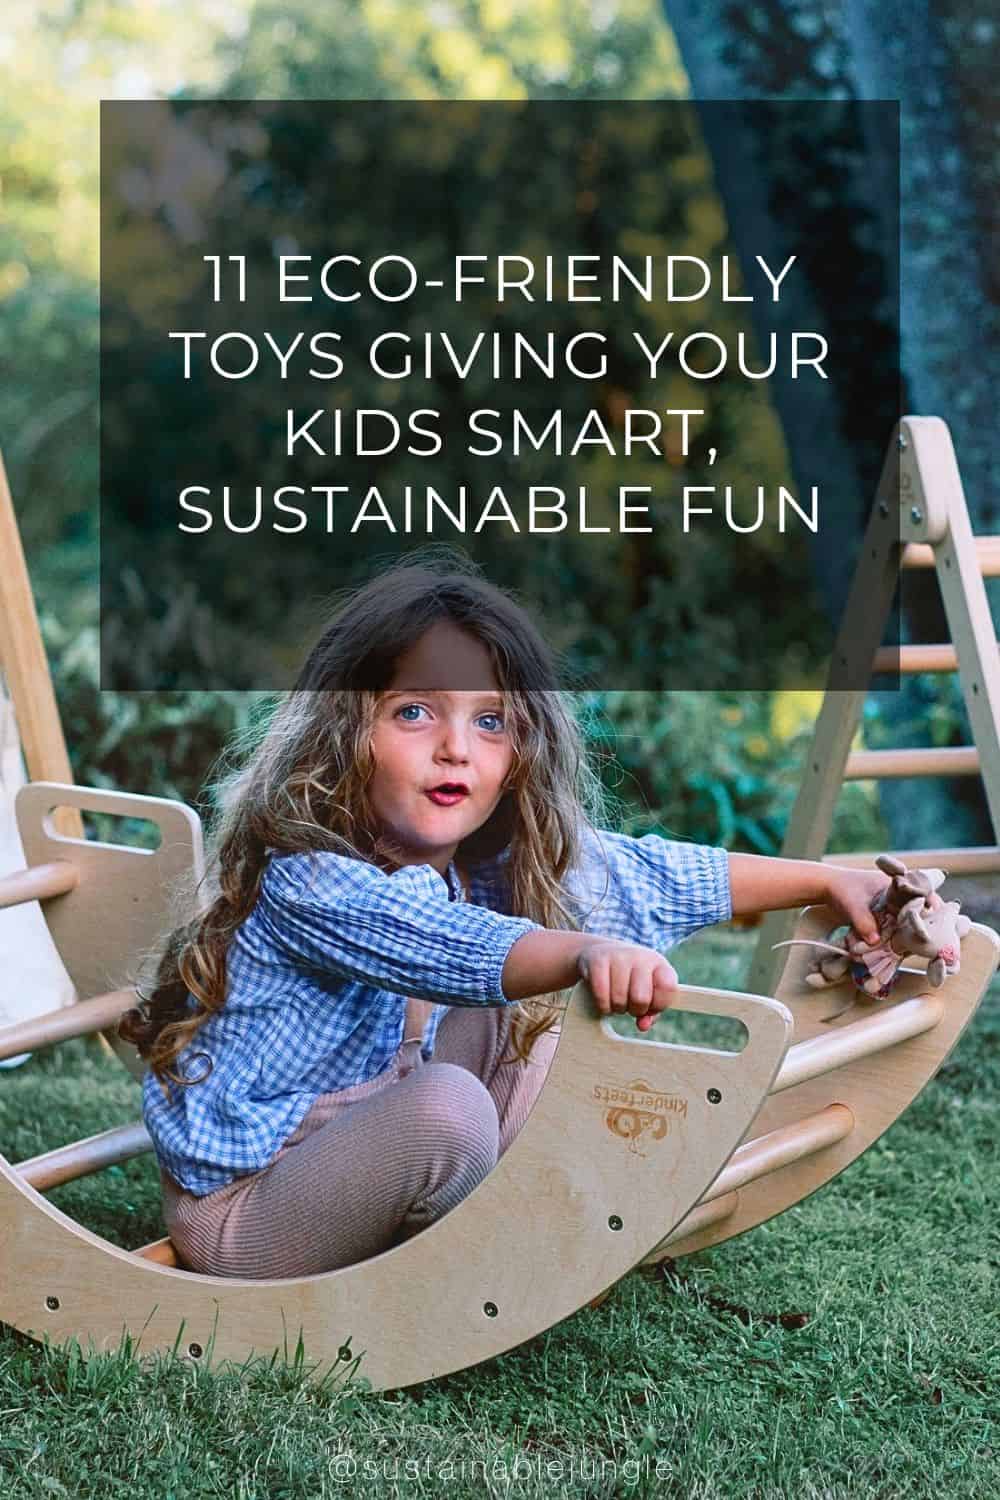 11 Eco-Friendly Toys Giving Your Kids Smart, Sustainable Fun Image by Kinderfeets #ecofriendlytoys #ecofriendlytoybrands #ecotoys #ecofriendlykidstoys #sustainabletoys #sustainablechildrenstoys #sustainablejungle